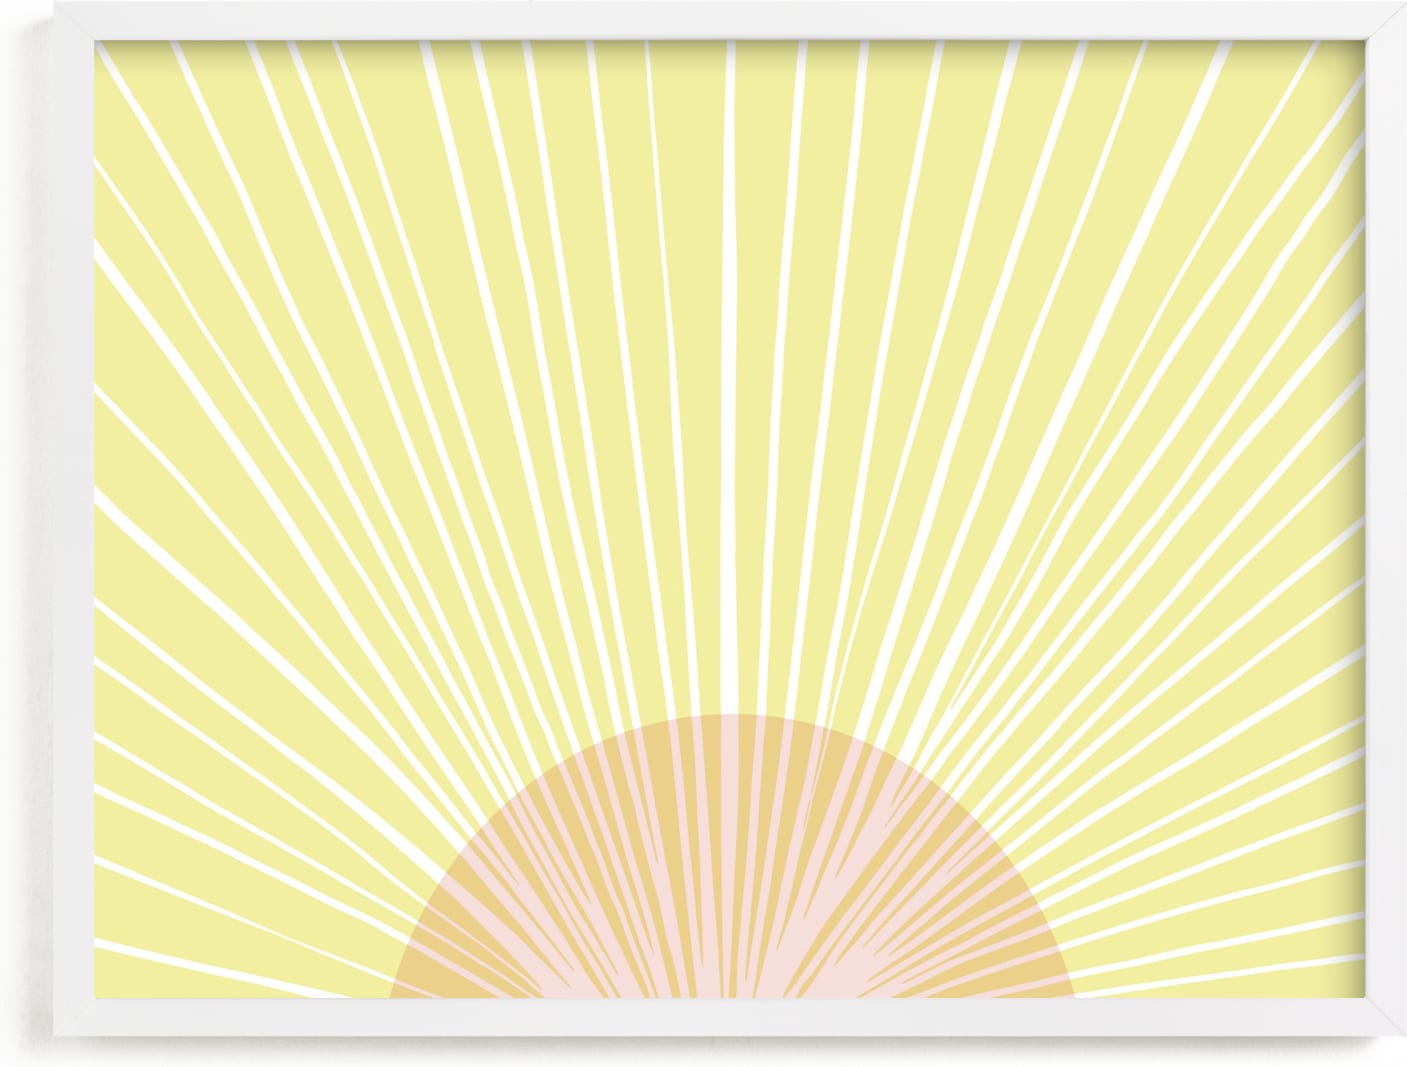 This is a yellow kids wall art by Kerry Doyle called Pastel Sunrise.